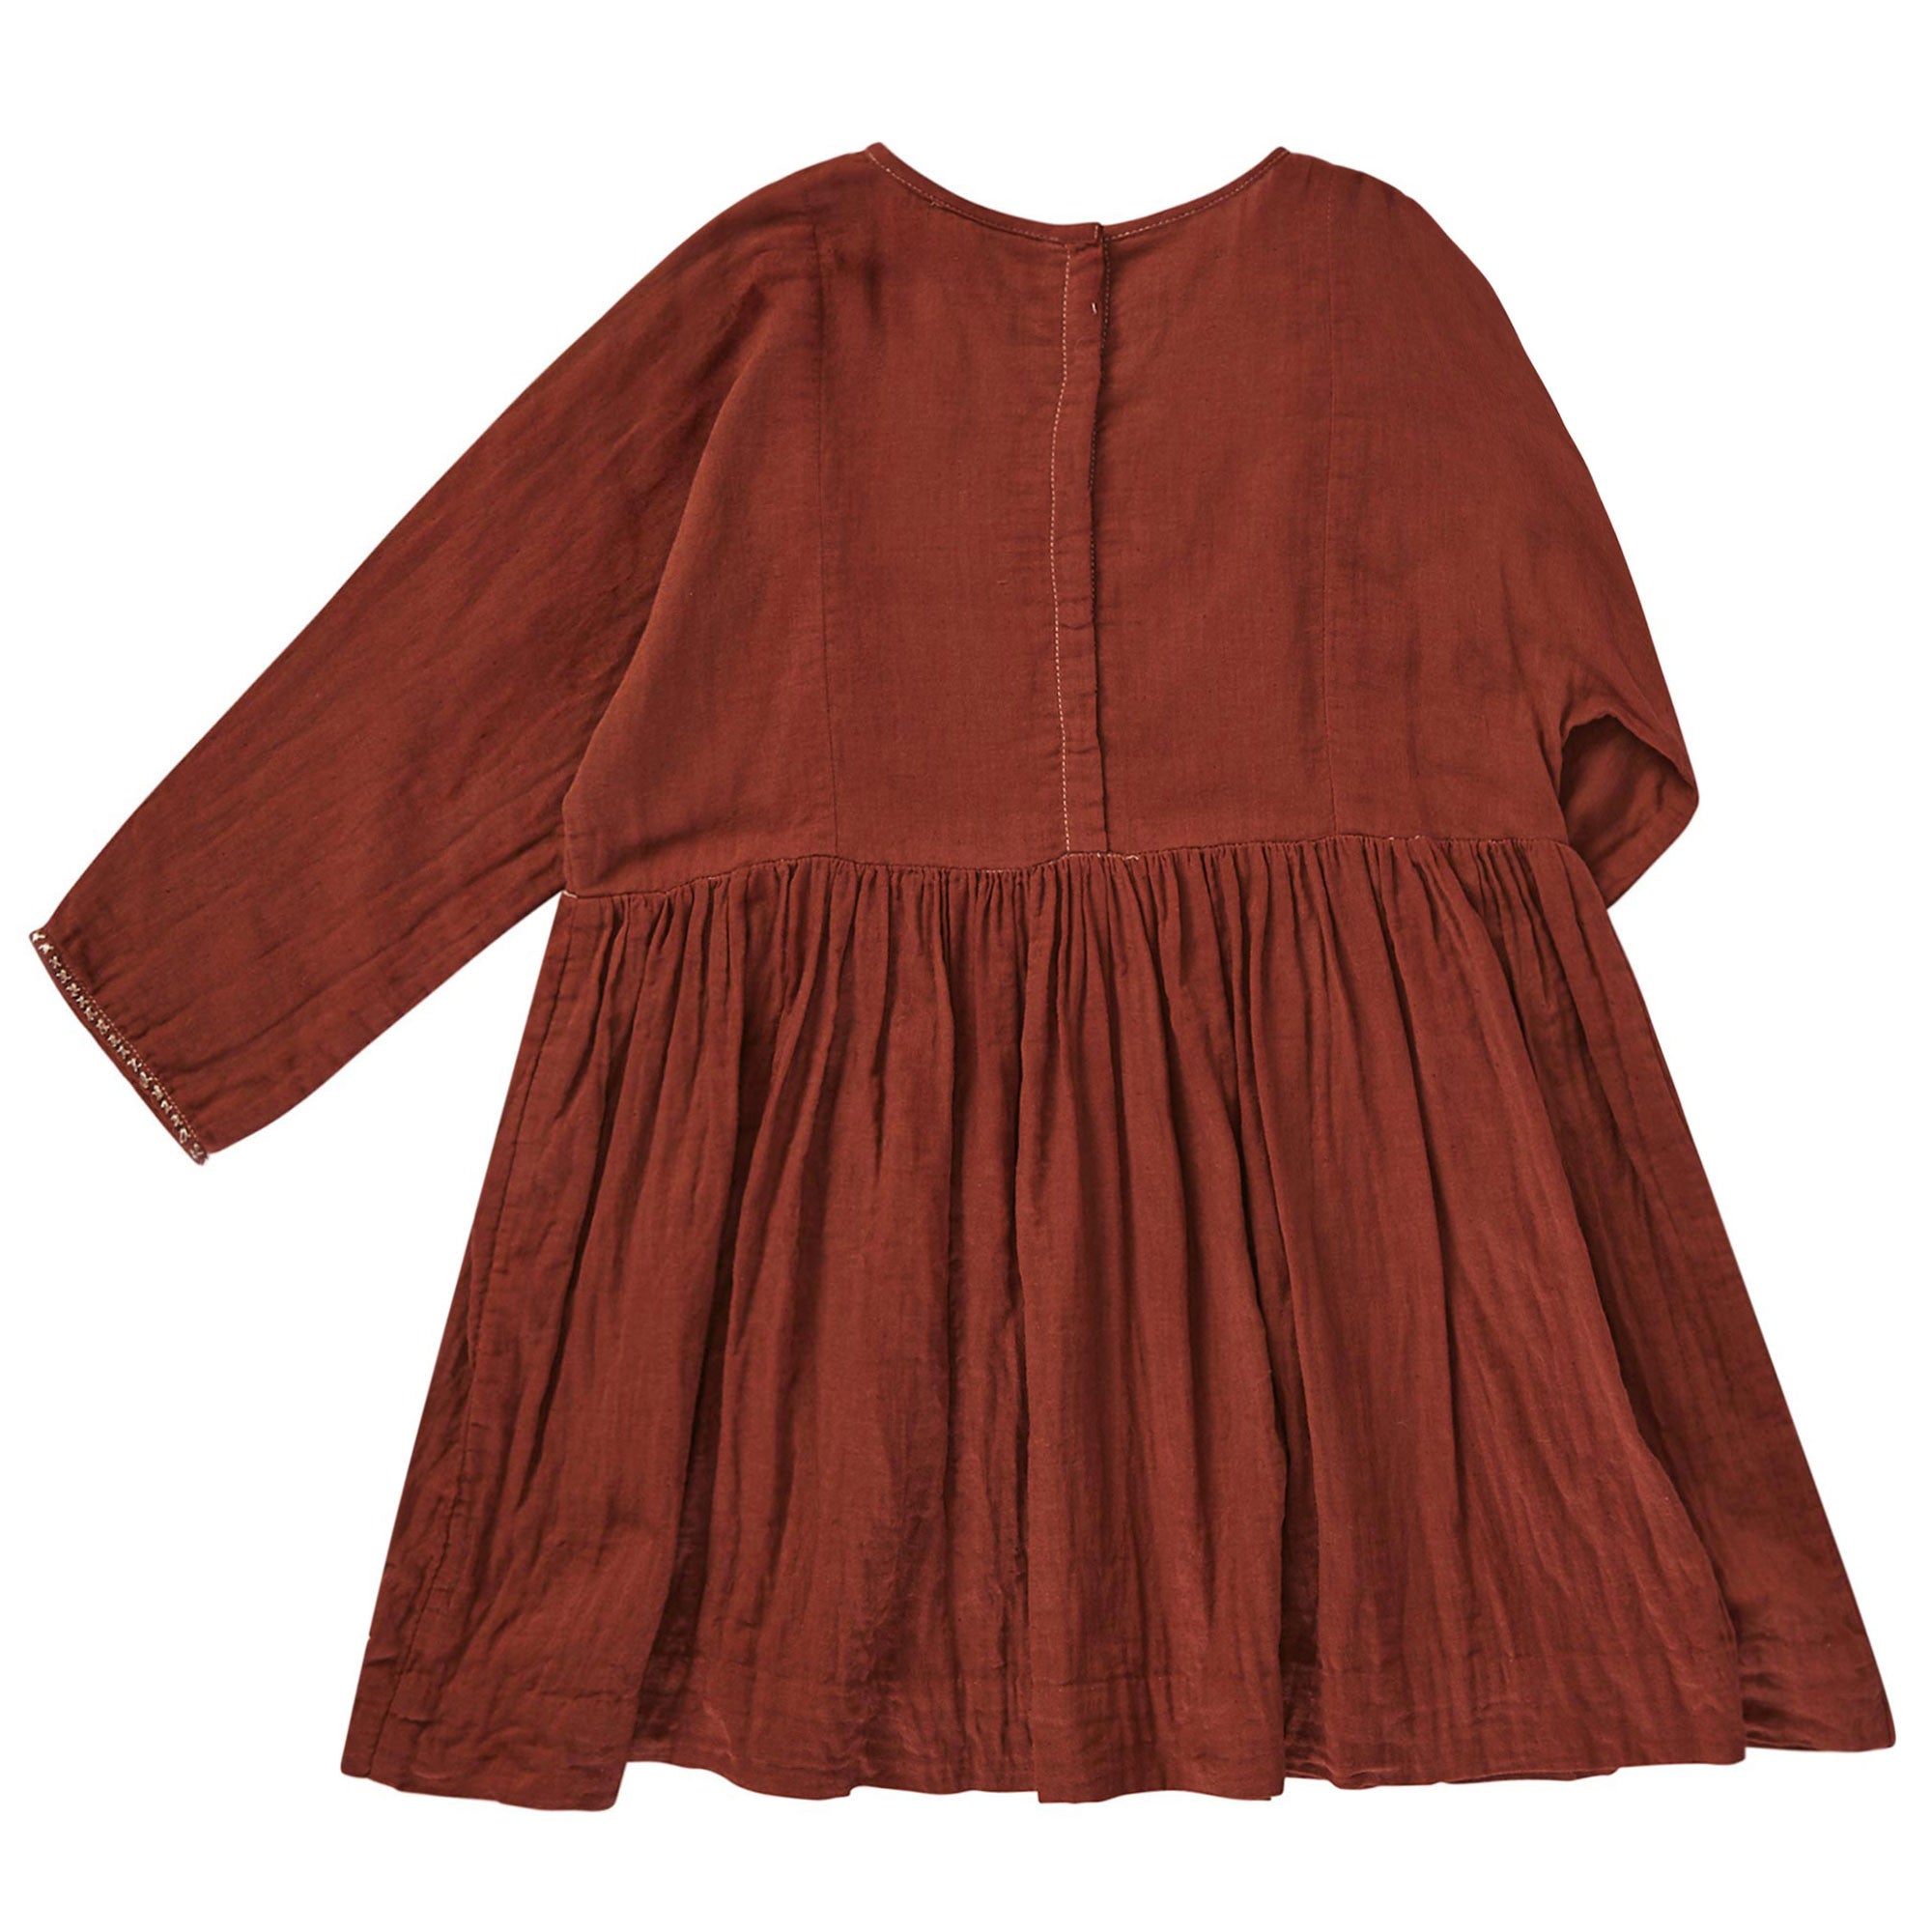 Girls Brown Dress With Embroidery Trims - CÉMAROSE | Children's Fashion Store - 2